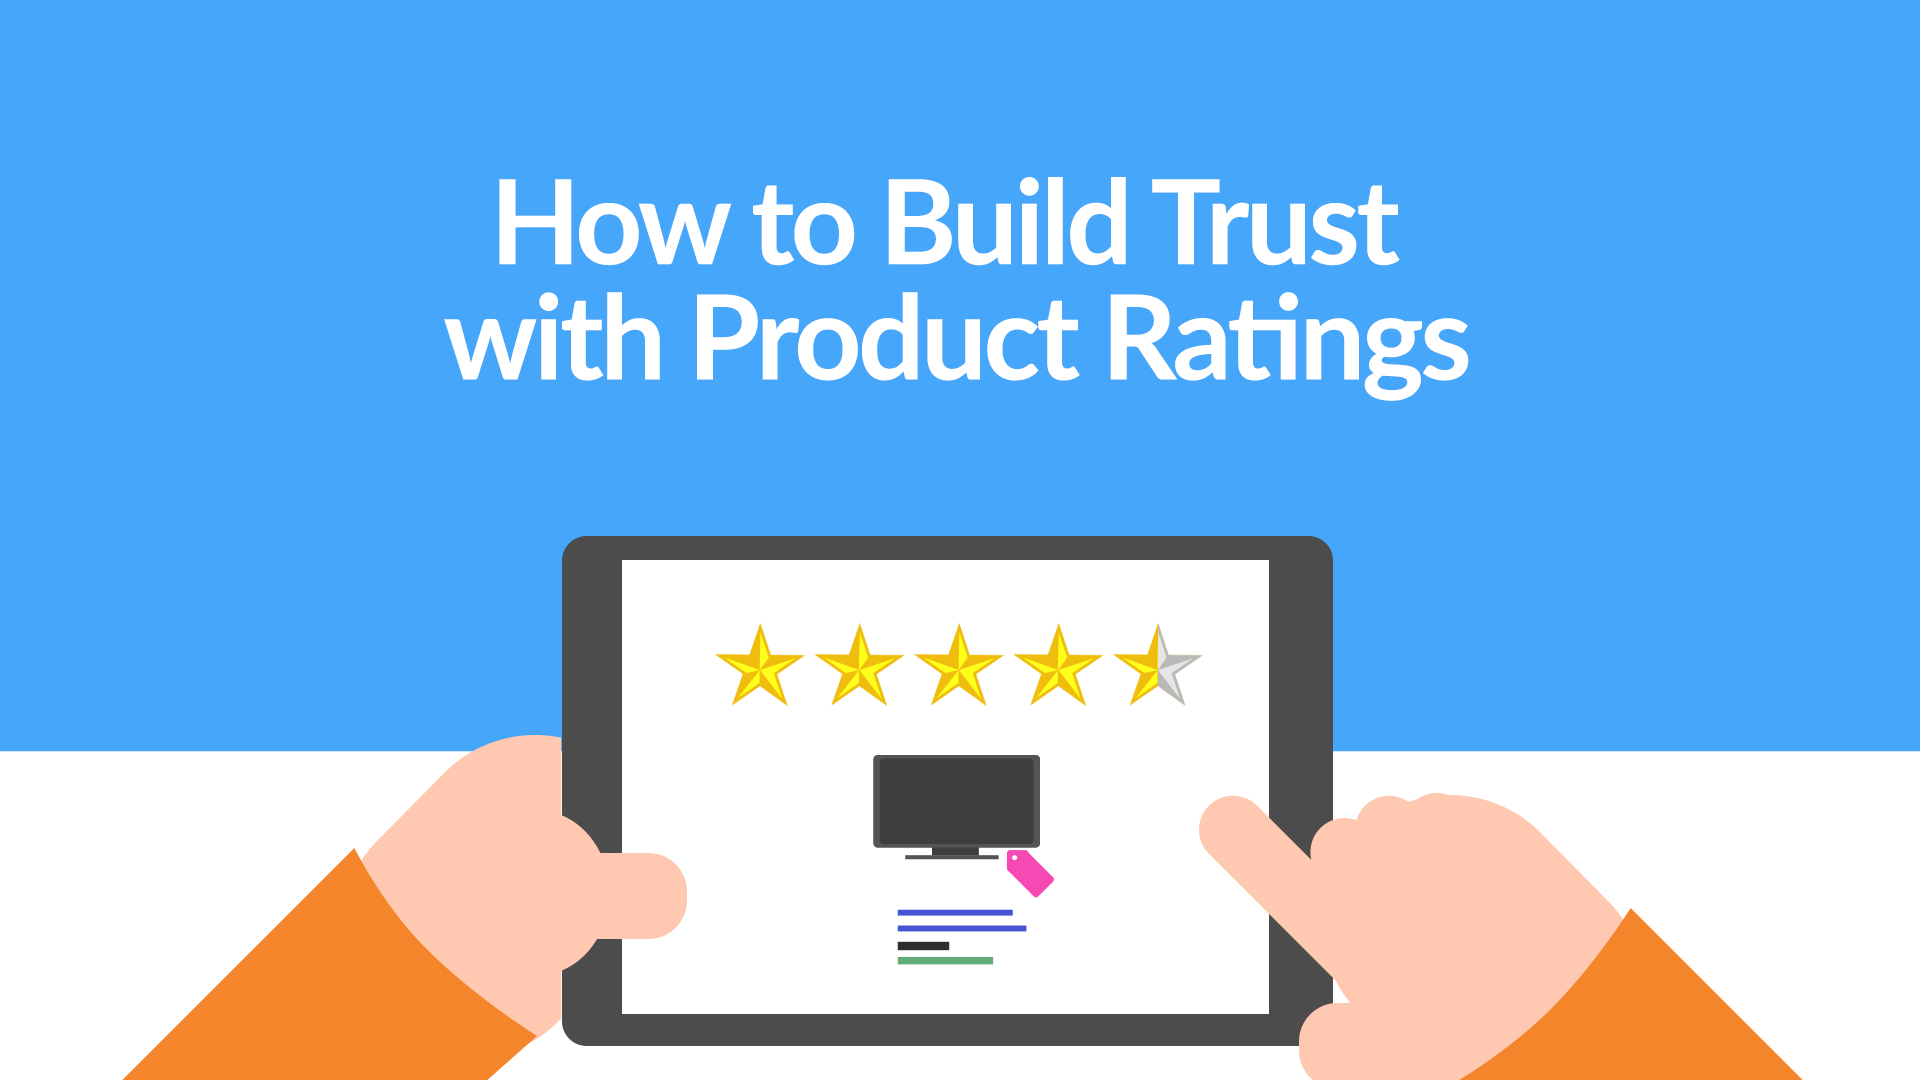 Product rating. How to build Trust. Trust ratings.